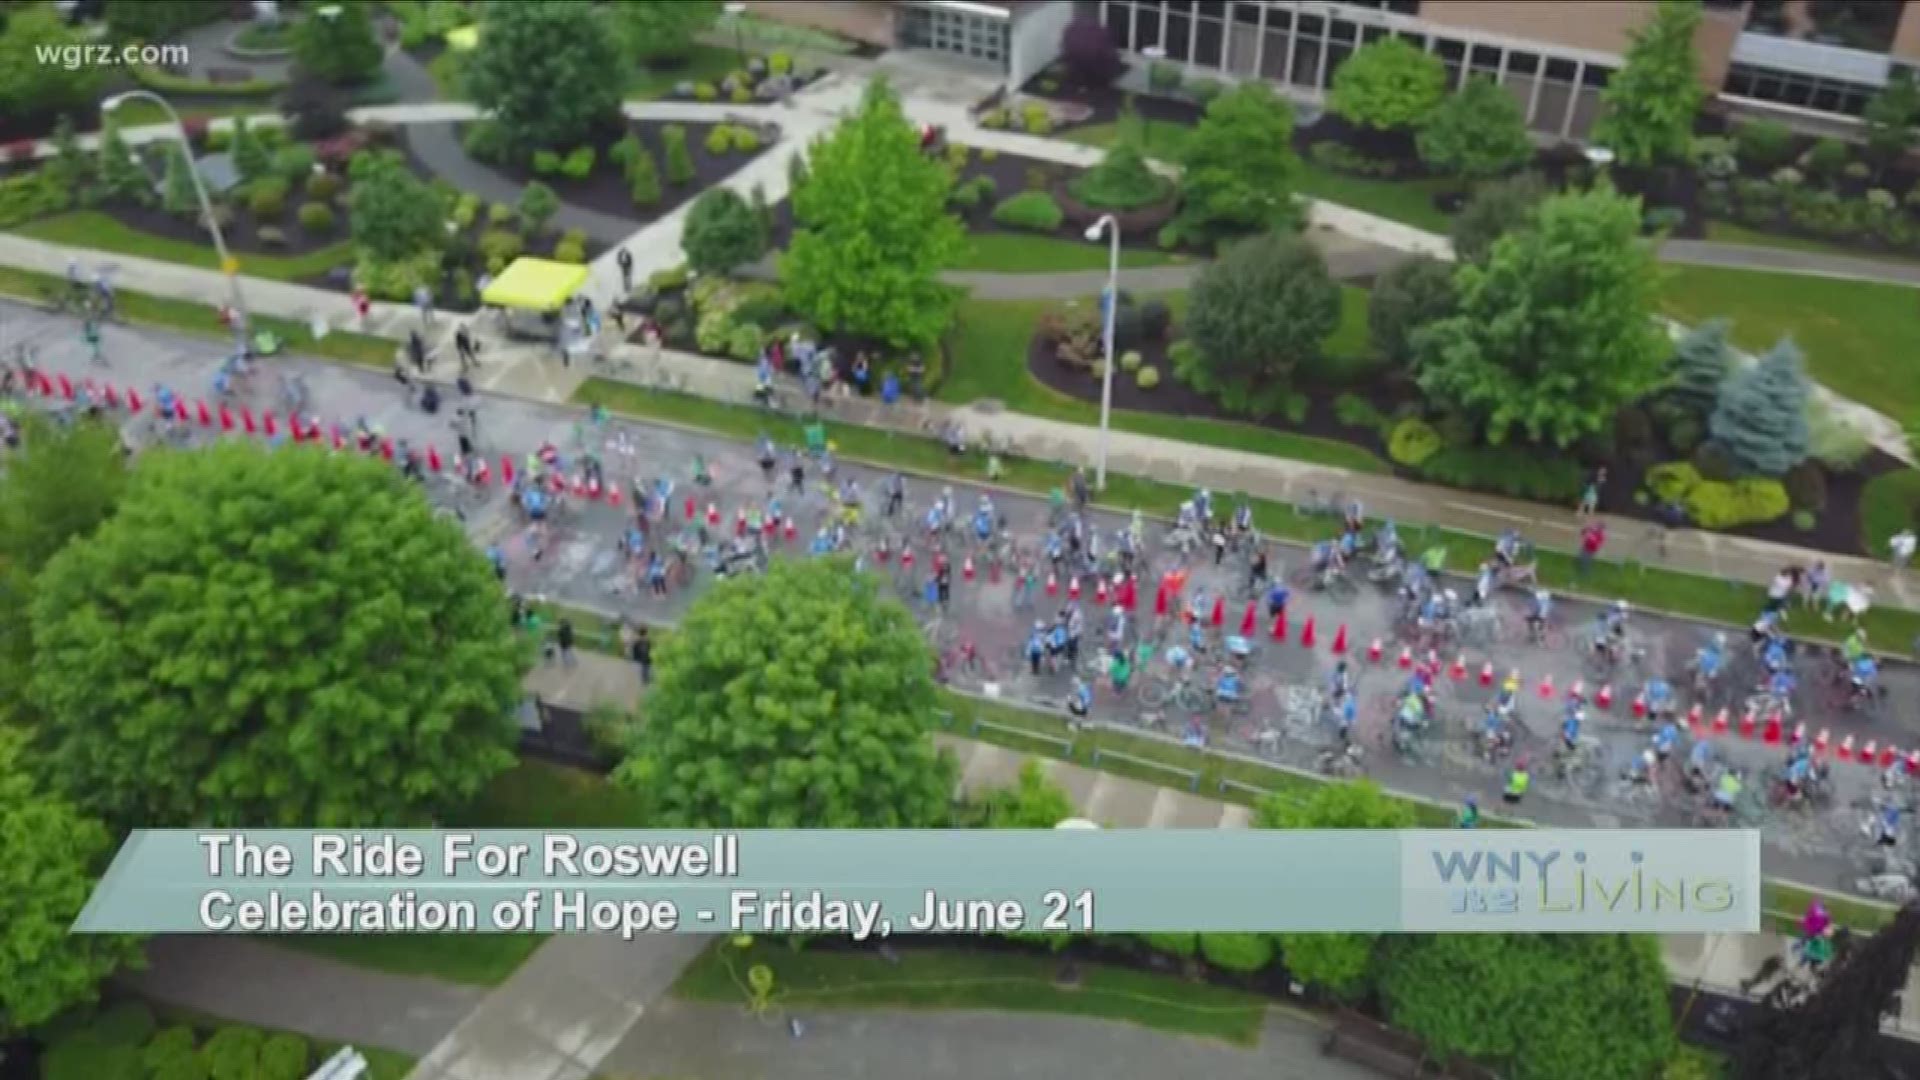 WNY Living - May 11 - The Ride for Roswell (SPONSORED CONTENT)